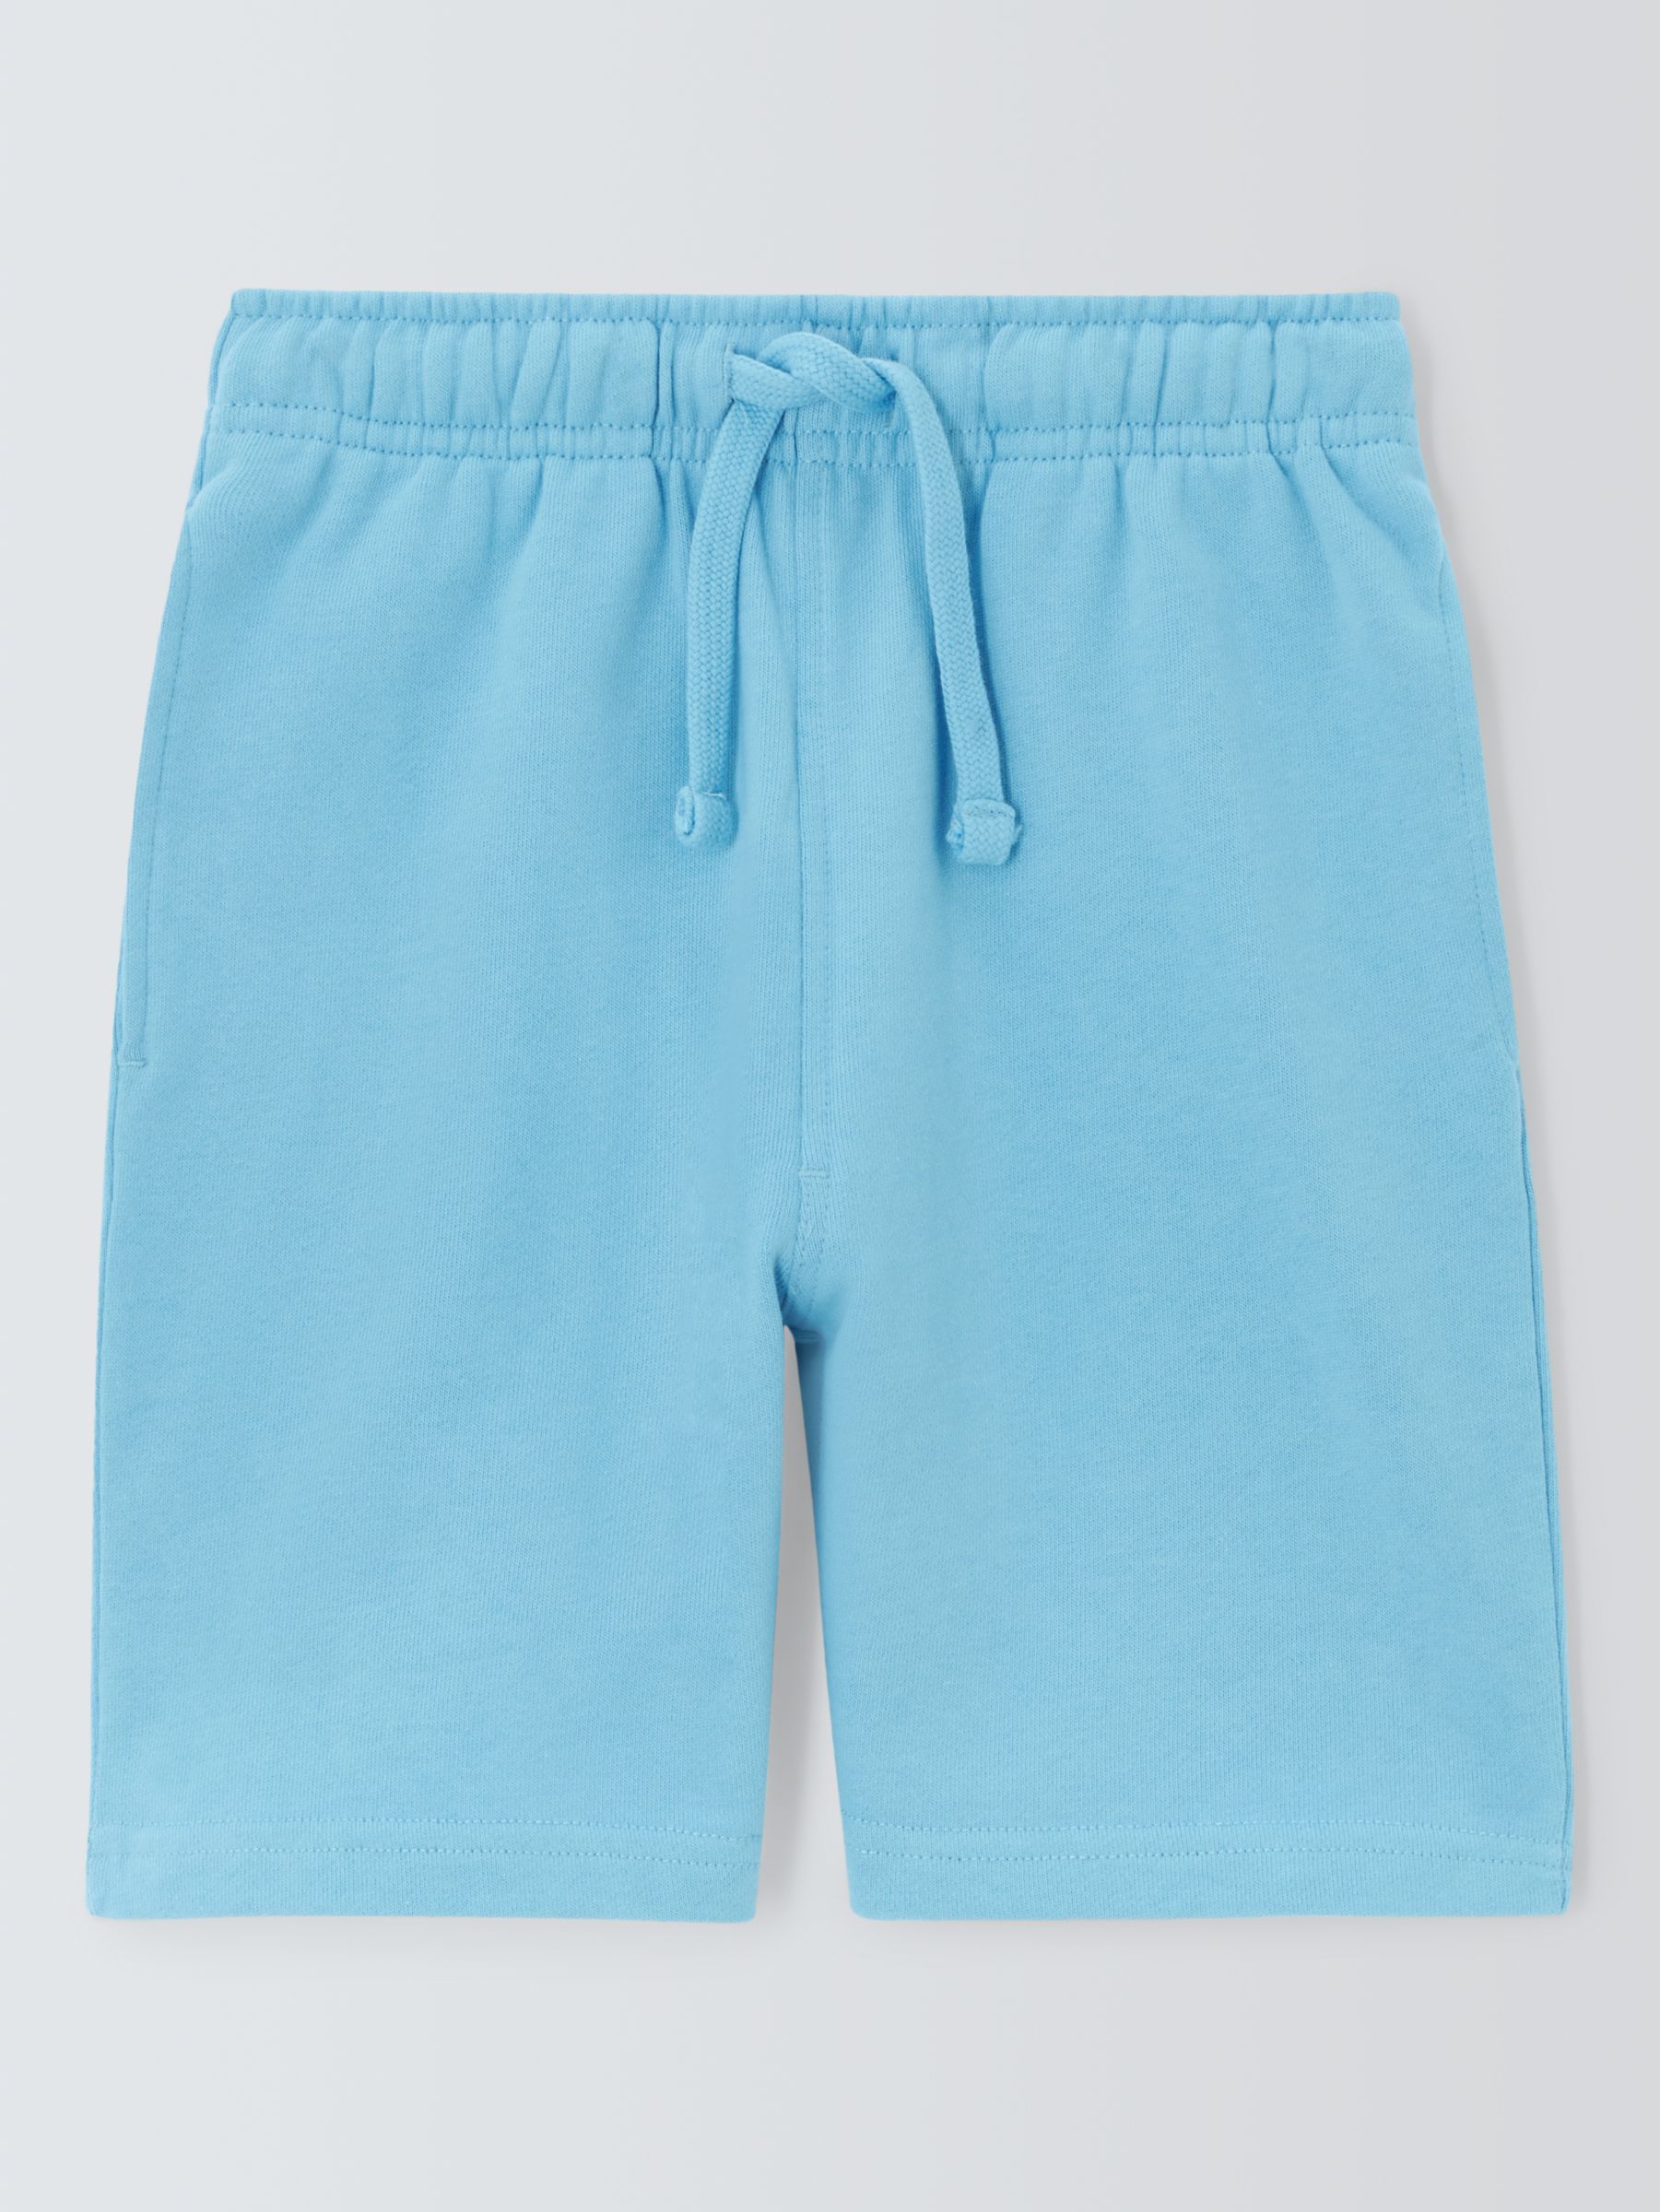 John Lewis ANYDAY Kids' Jersey Cotton Shorts, Air Blue, 2 years